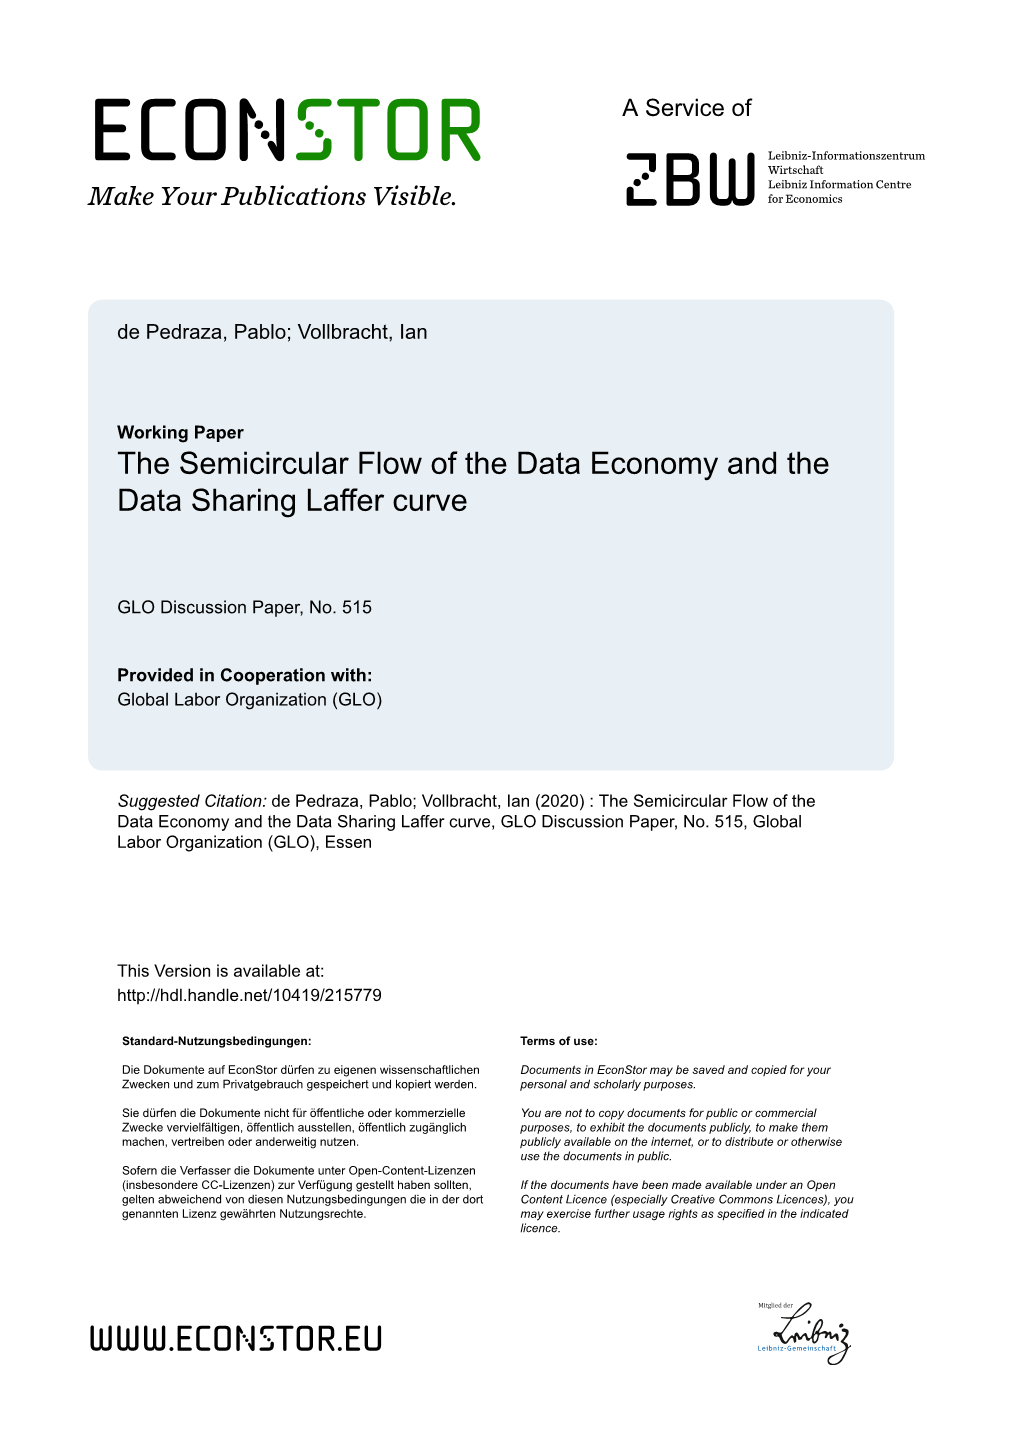 The Semicircular Flow of the Data Economy and the Data Sharing Laffer Curve